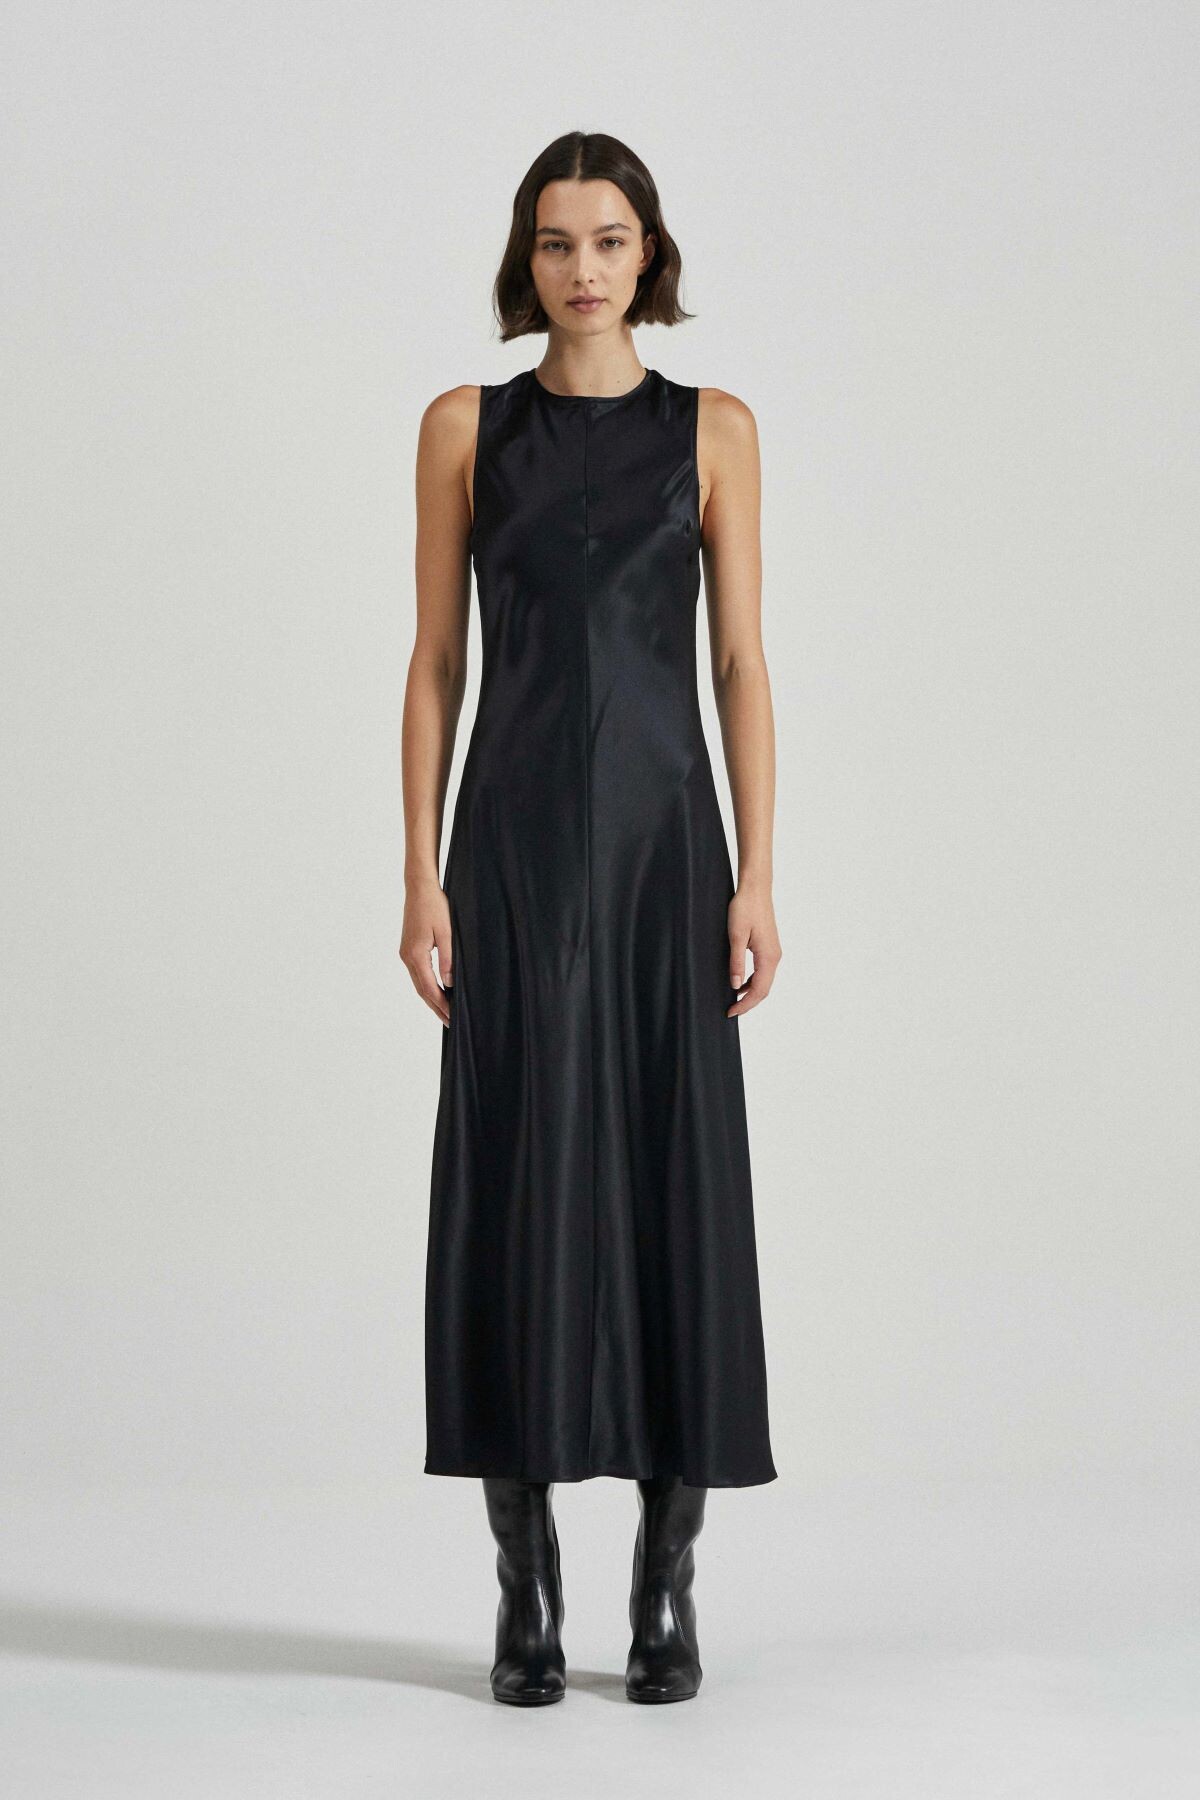 THE WILLA DRESS (BLACK)- FRIENDS WITH FRANK WINTER 23